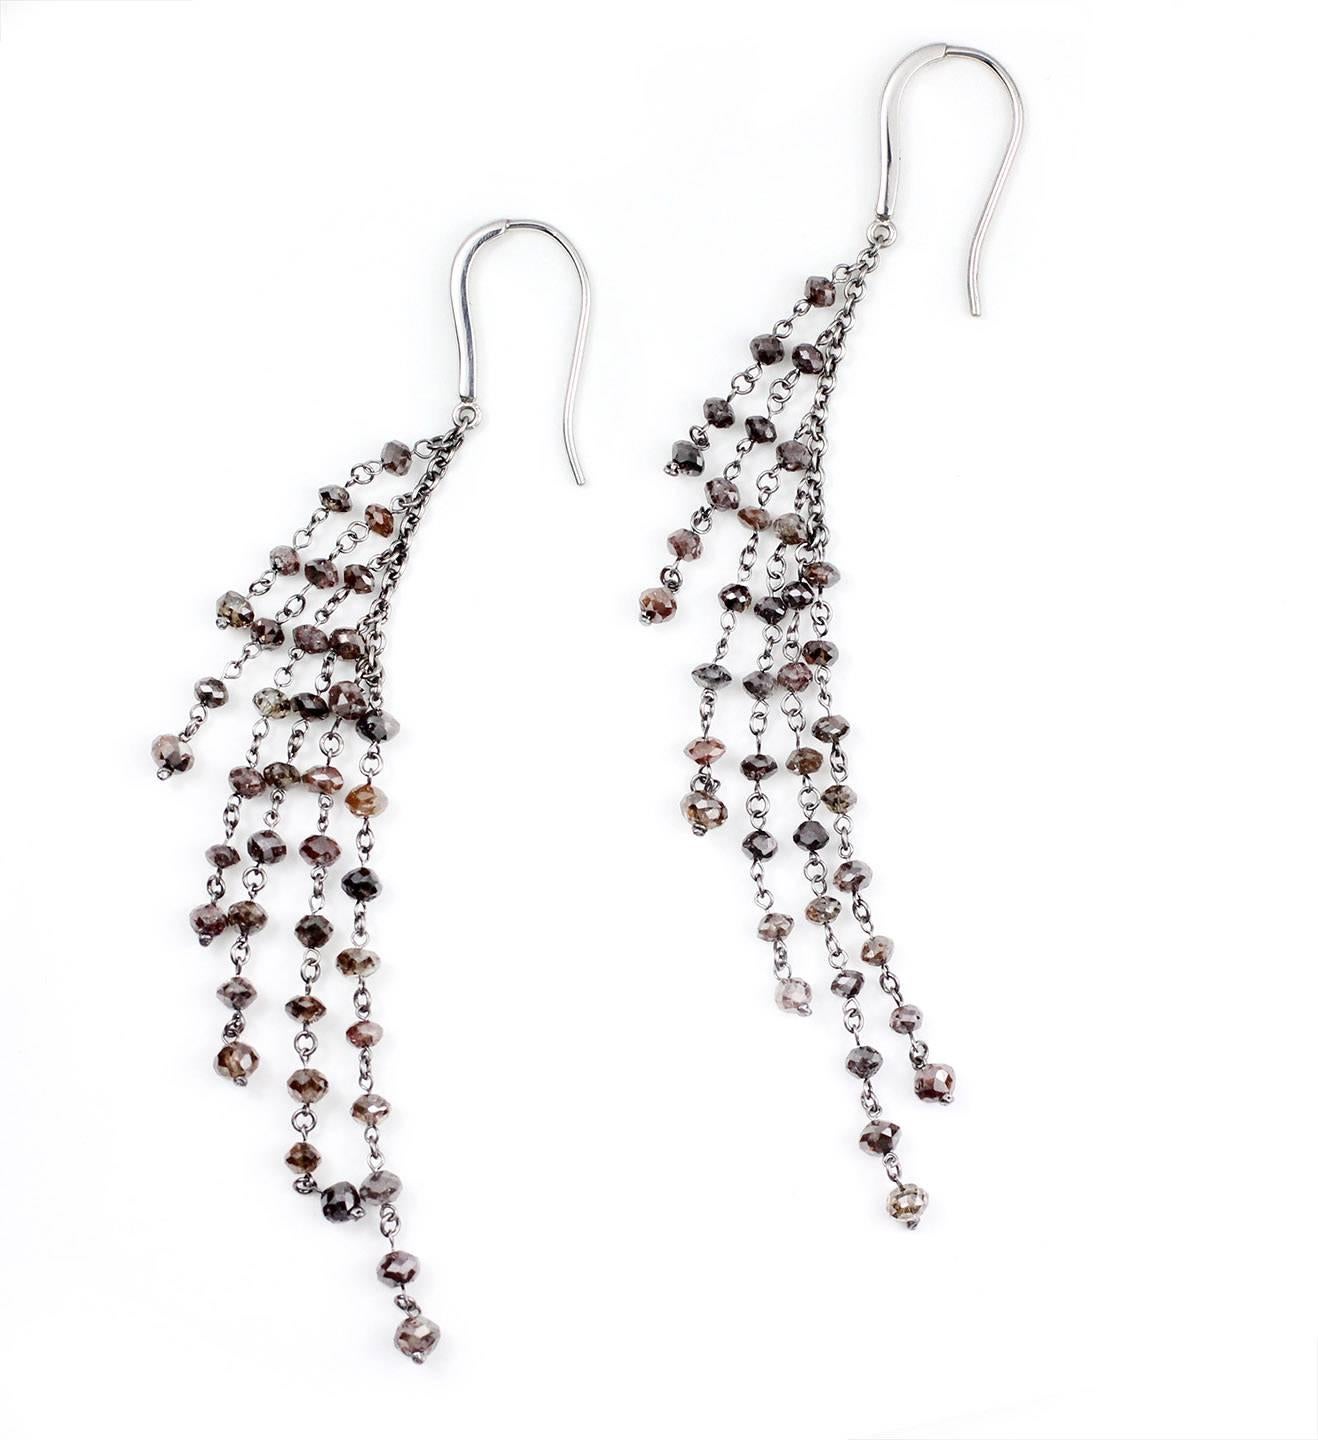 Platinum and Brown Diamond Bead Earrings.  Containing 78 Natural Color Diamond Beads (Approximately 12.88 Cts.).  

Designed and made in house by Julius Cohen New York.